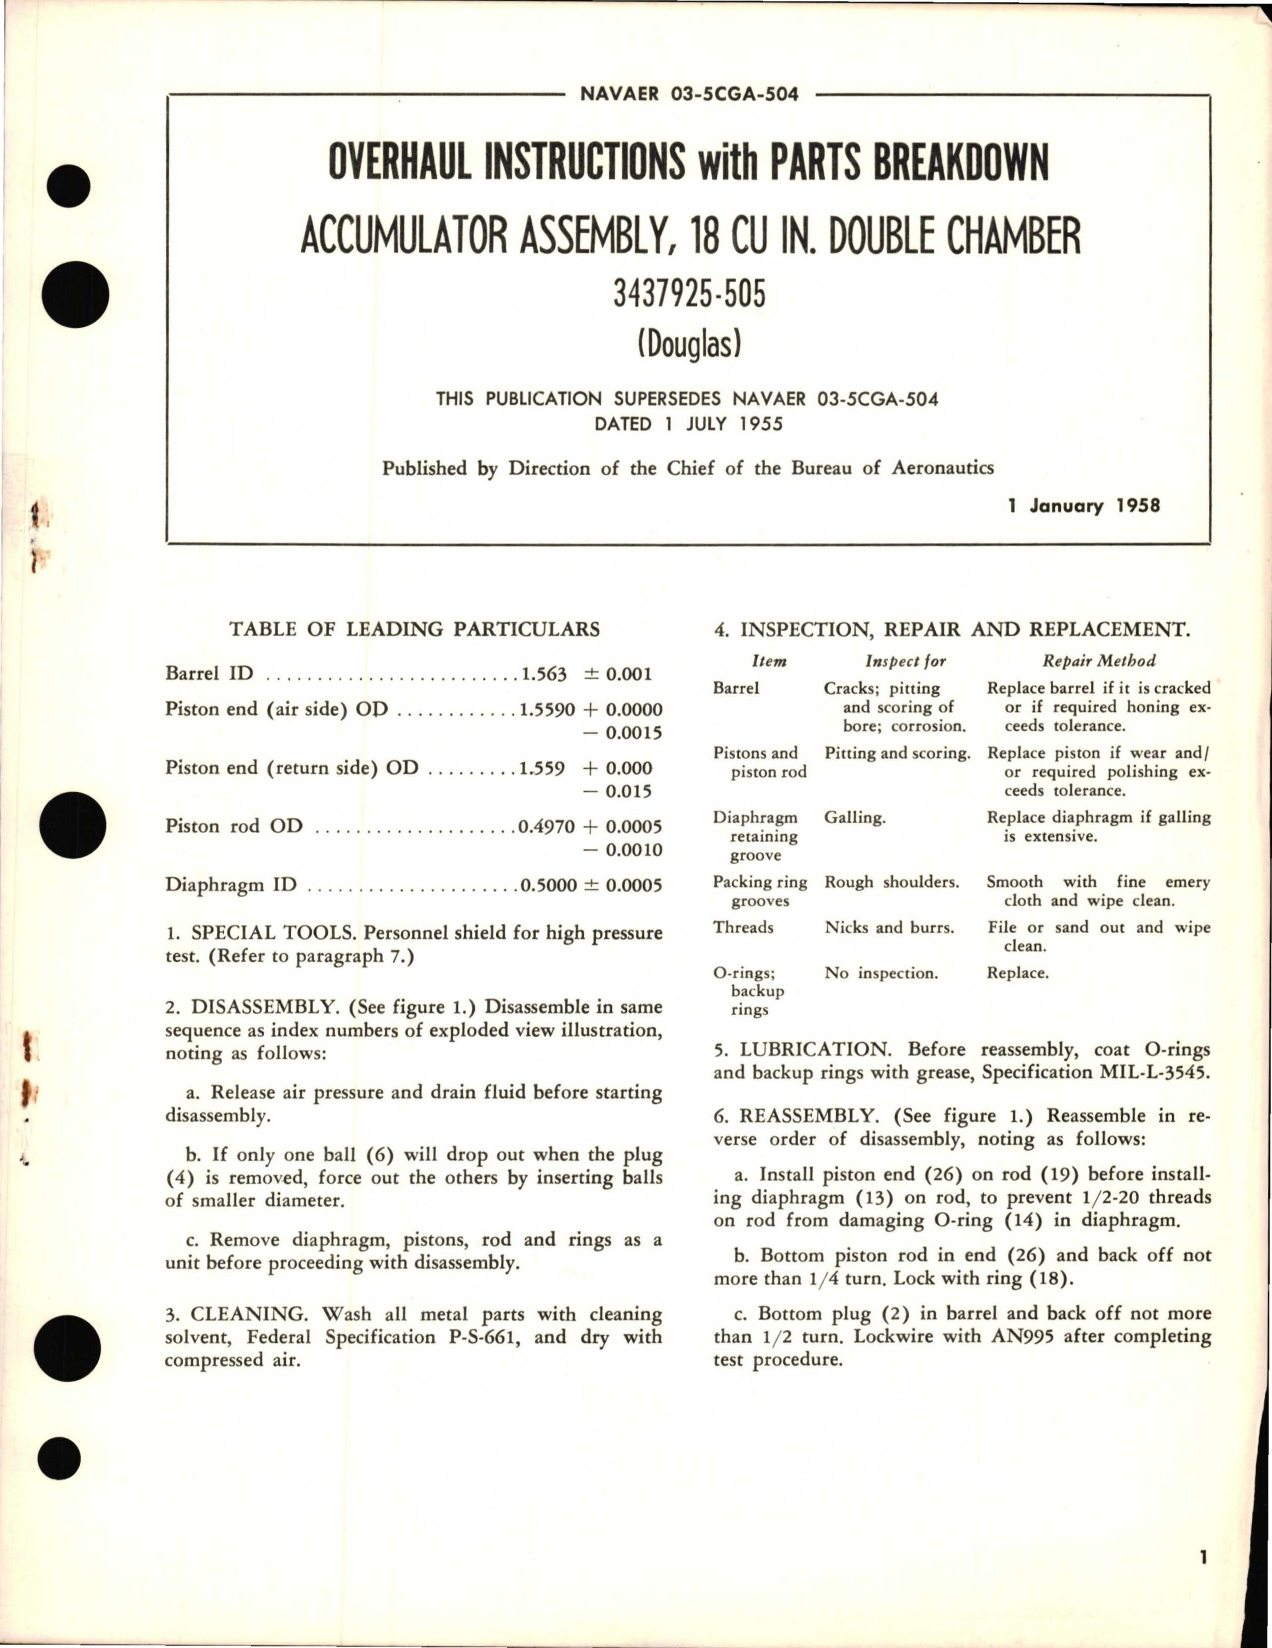 Sample page 1 from AirCorps Library document: Overhaul Instructions with Parts Breakdown for Accumulator Assembly, 18 CU IN Double Chamber - 3437925-505